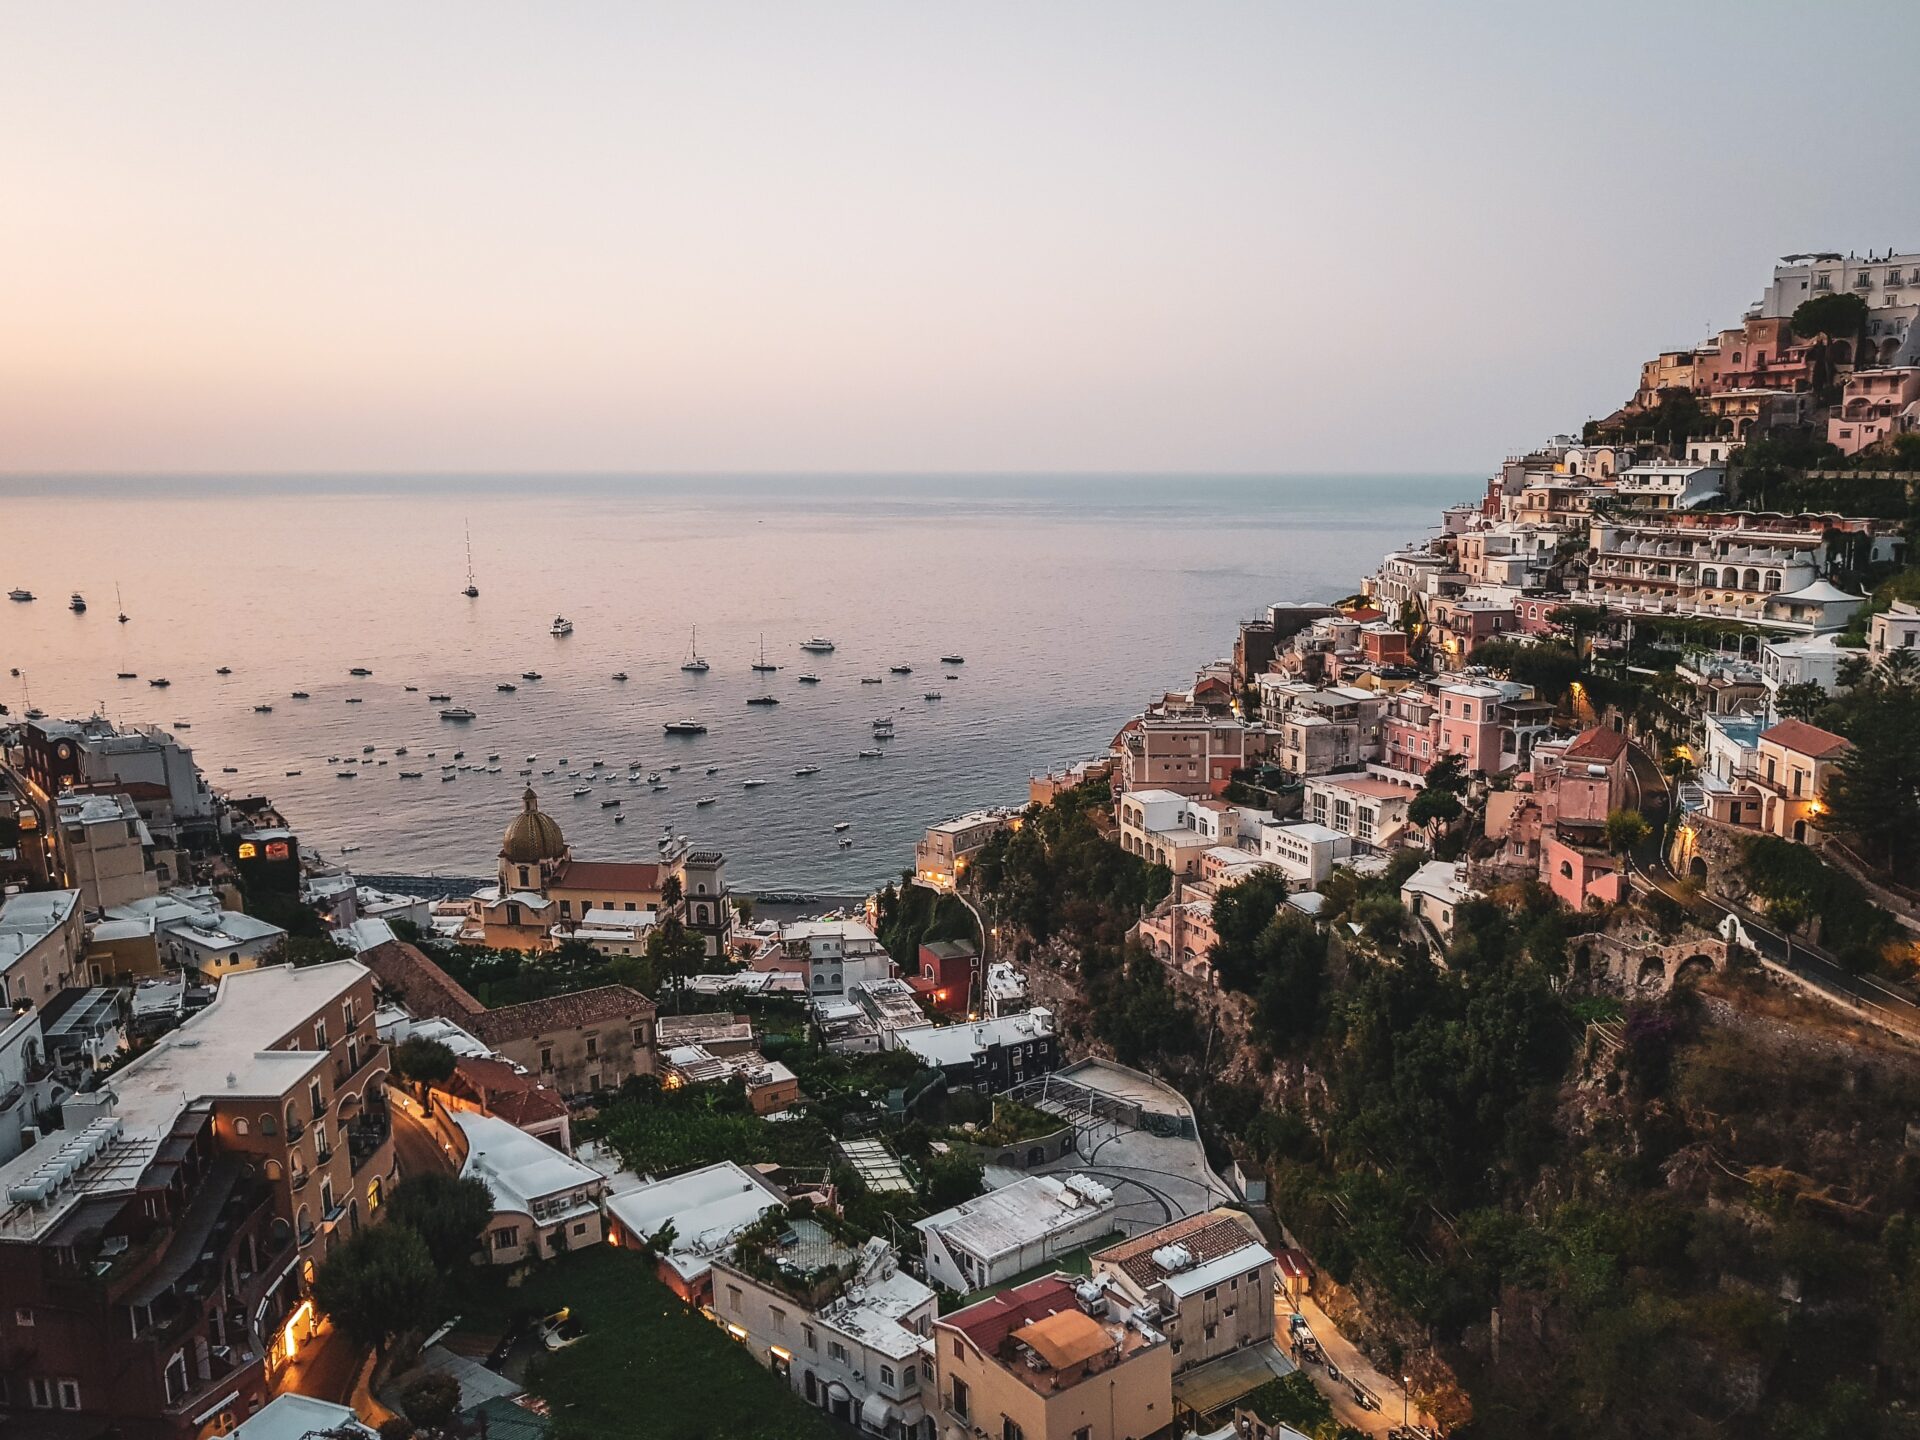 A sweeping view of Positano